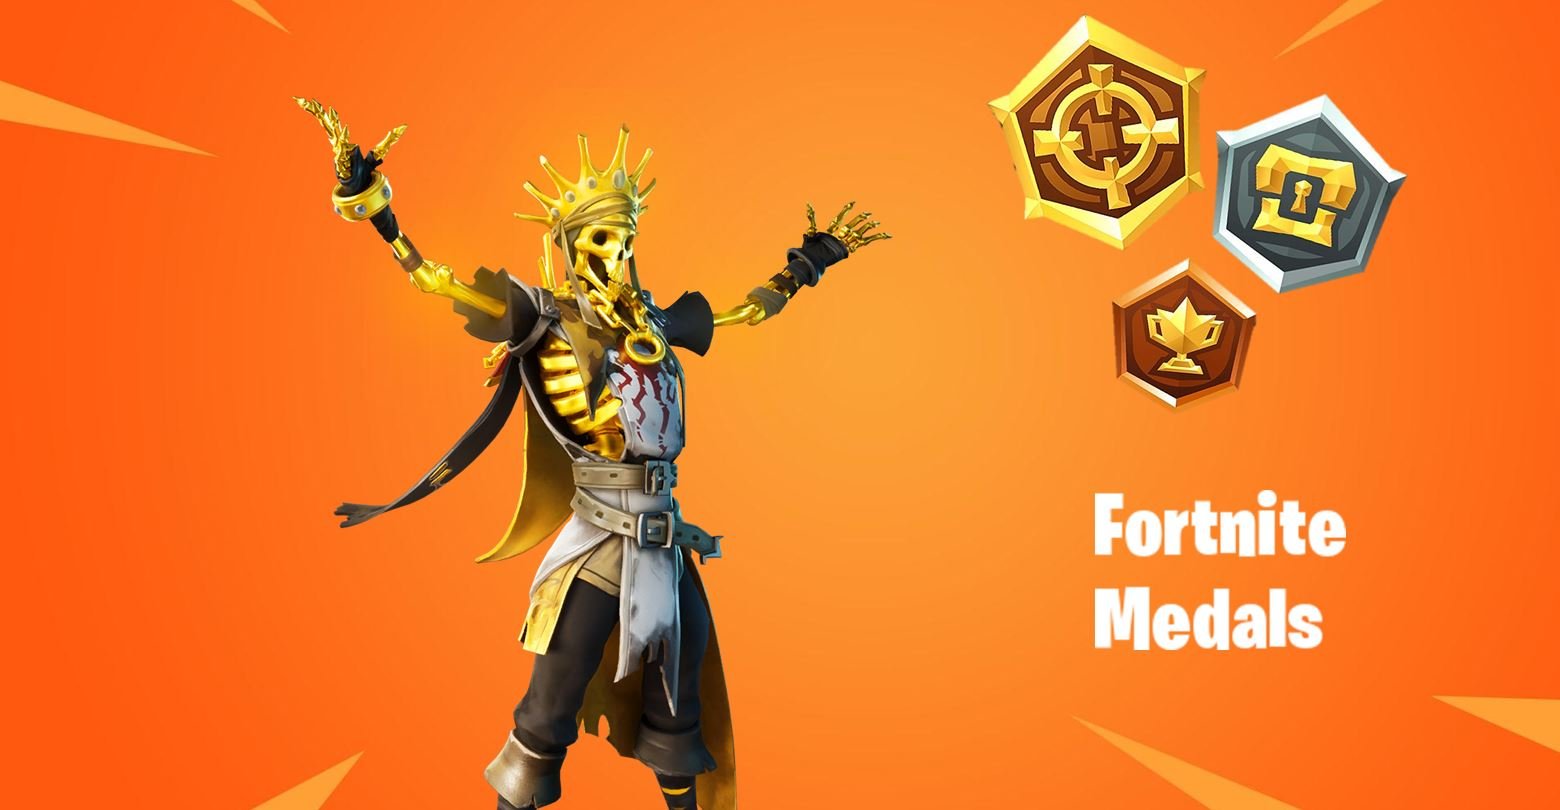 Fortnite Medals Where and How to collect medals in Fortnite quickly